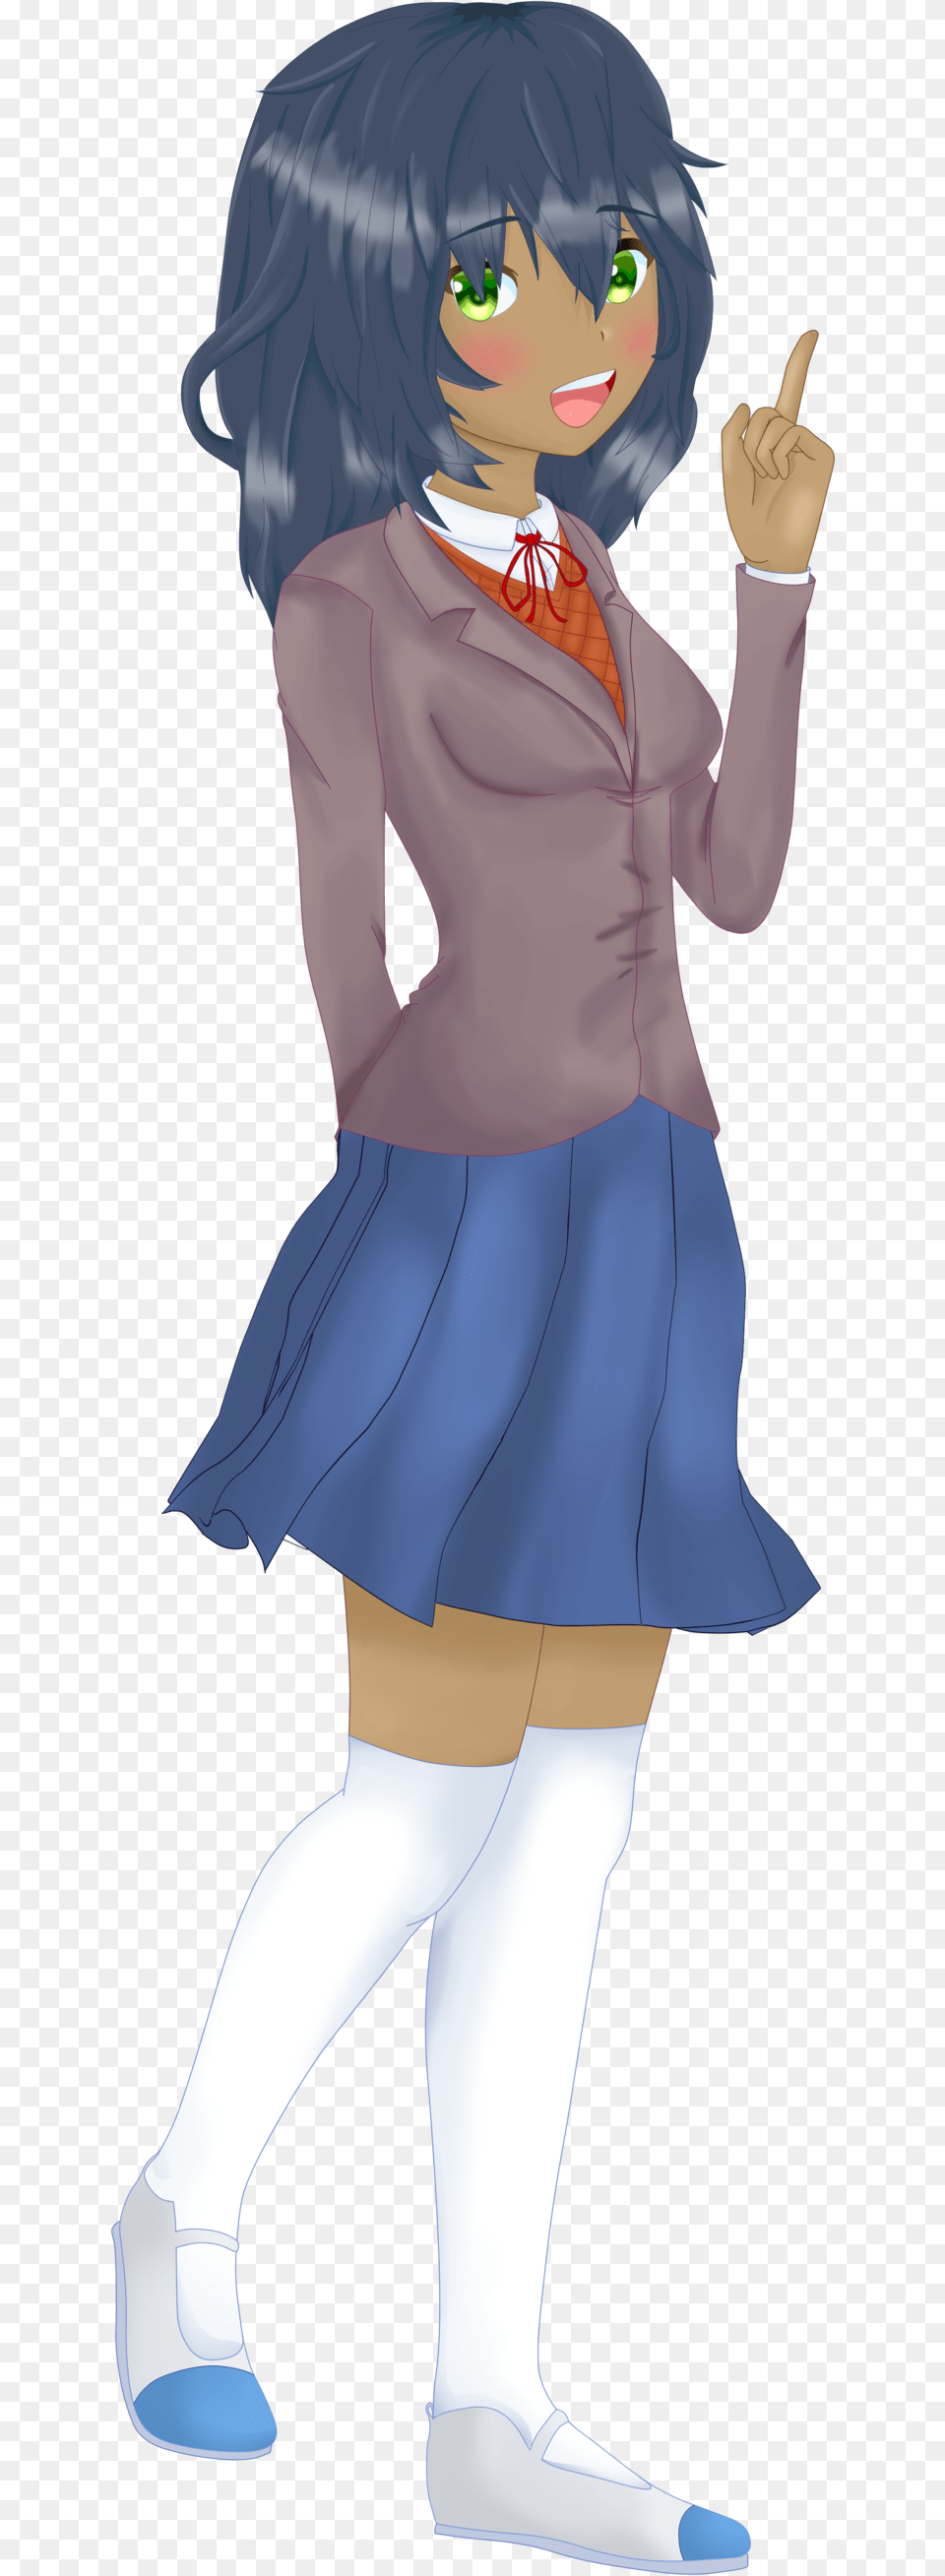 Amber In The Style Of Doki Doki Literature Club, Book, Comics, Publication, Person Png